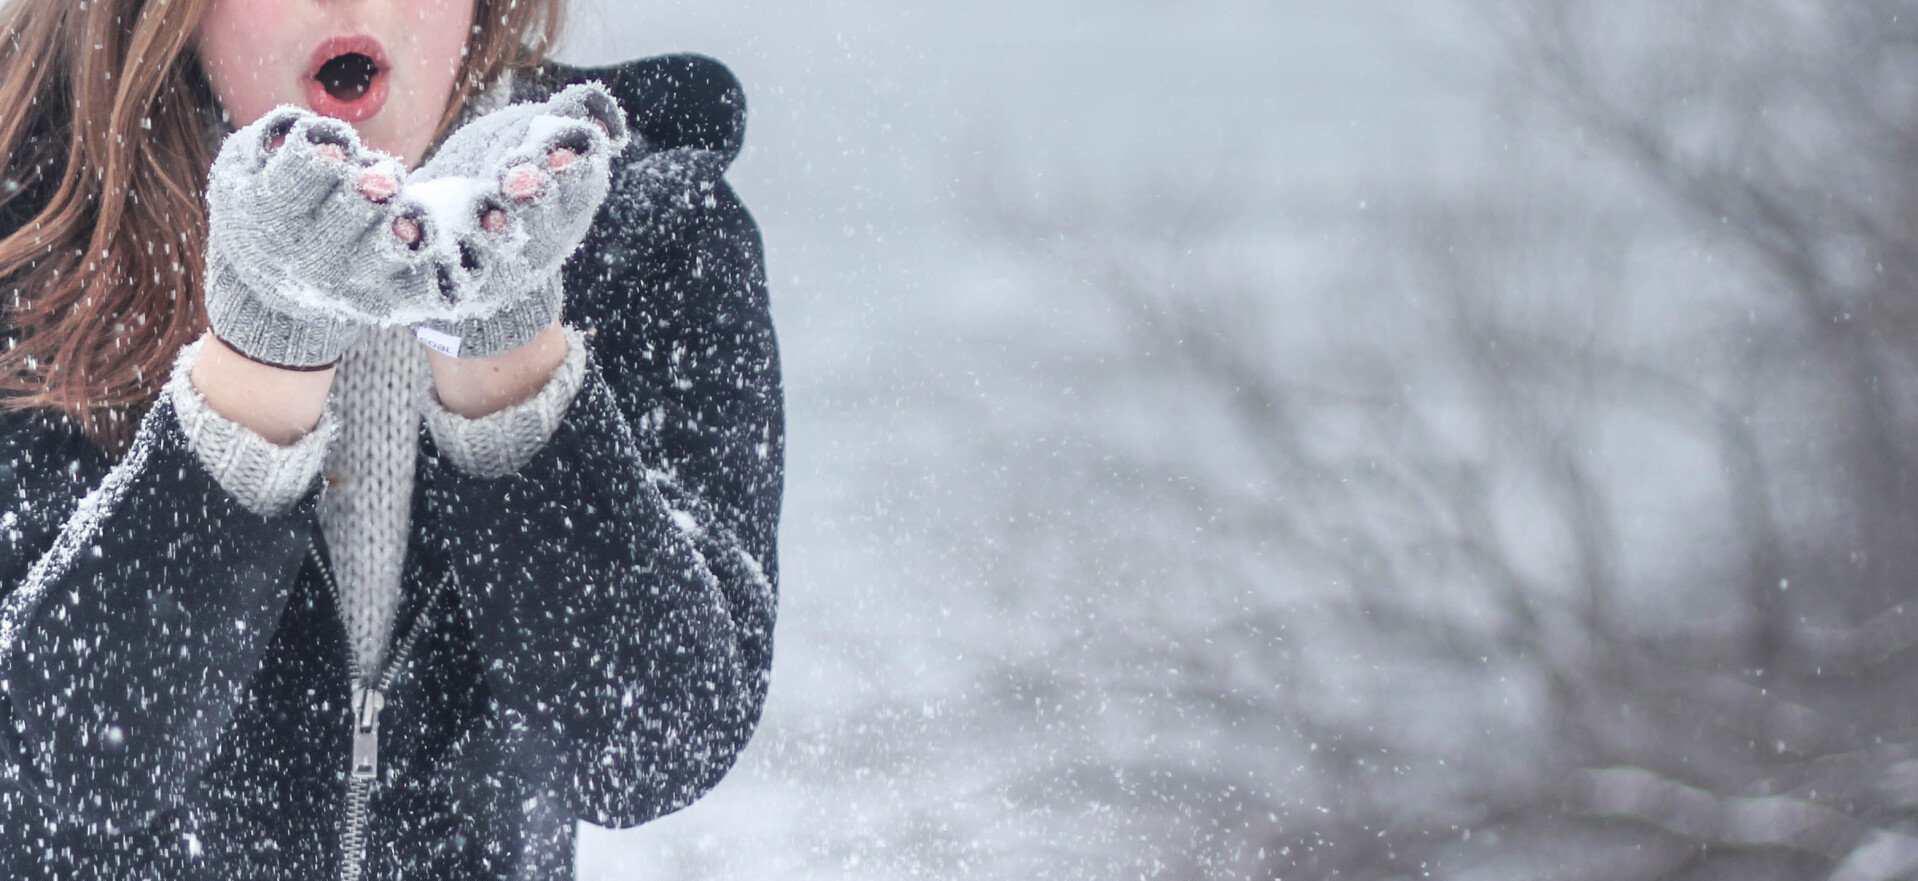 A woman is blowing snow from her hands in the snow.